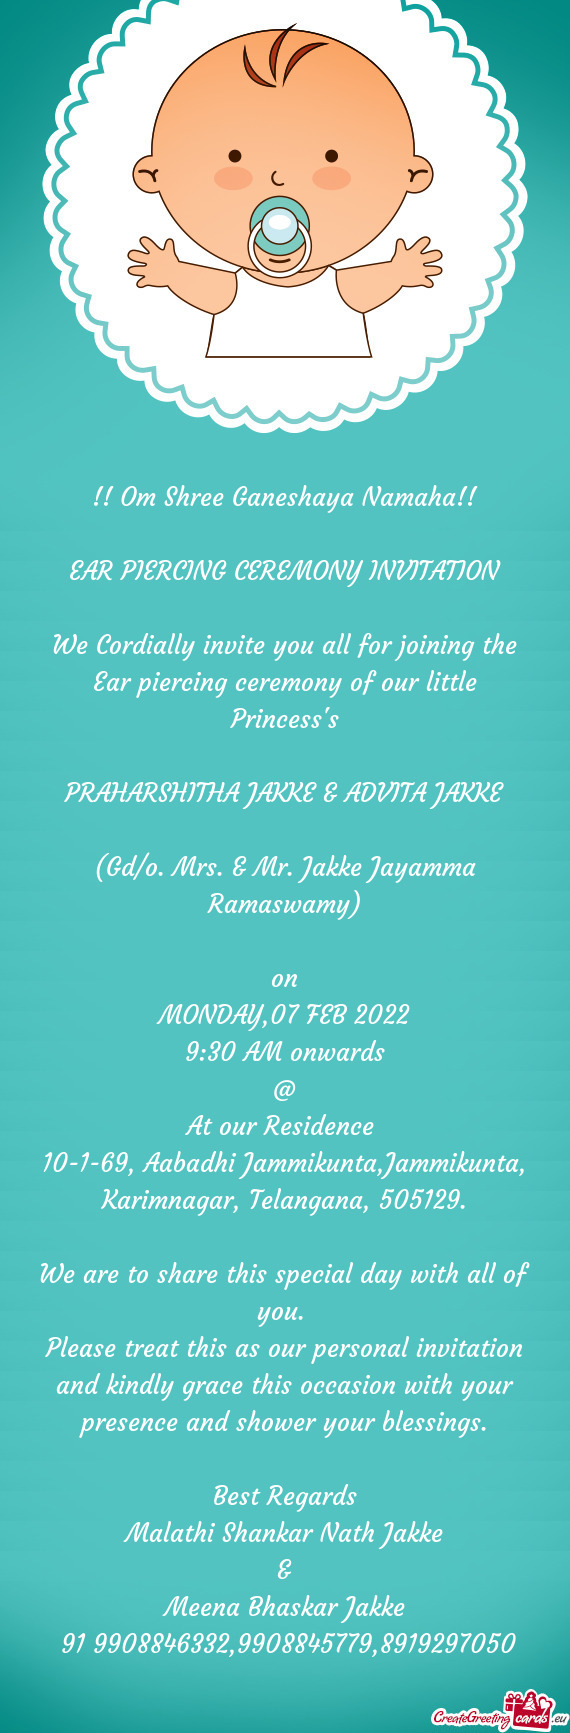 We Cordially invite you all for joining the Ear piercing ceremony of our little Princess